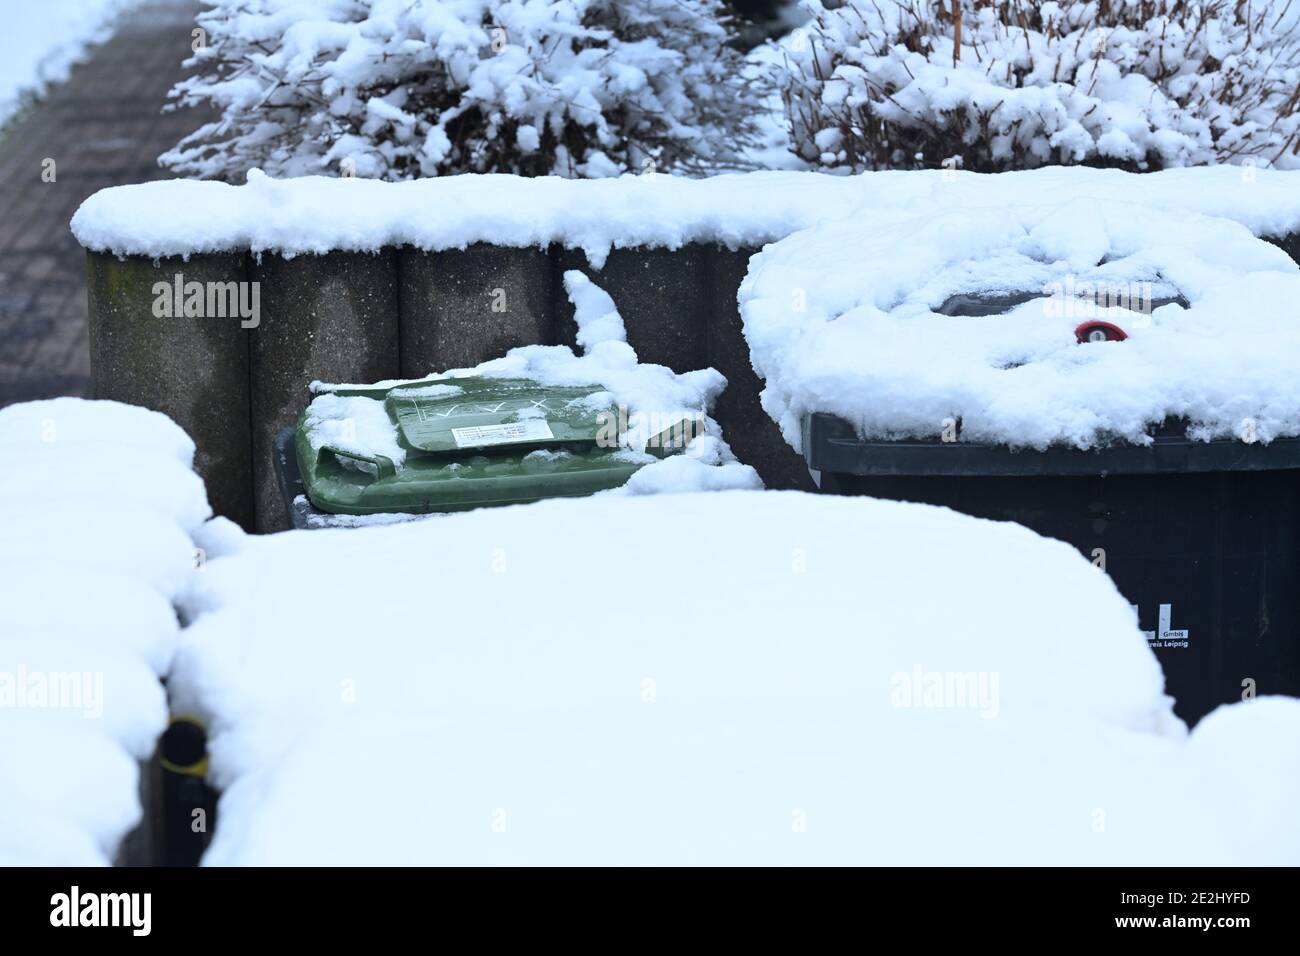 Leipzig, Germany. 09th Jan, 2020. Rubbish bins covered with fresh snow stand next to each other. The green bin is visible. Credit: Volkmar Heinz/dpa-Zentralbild/ZB/dpa/Alamy Live News Stock Photo